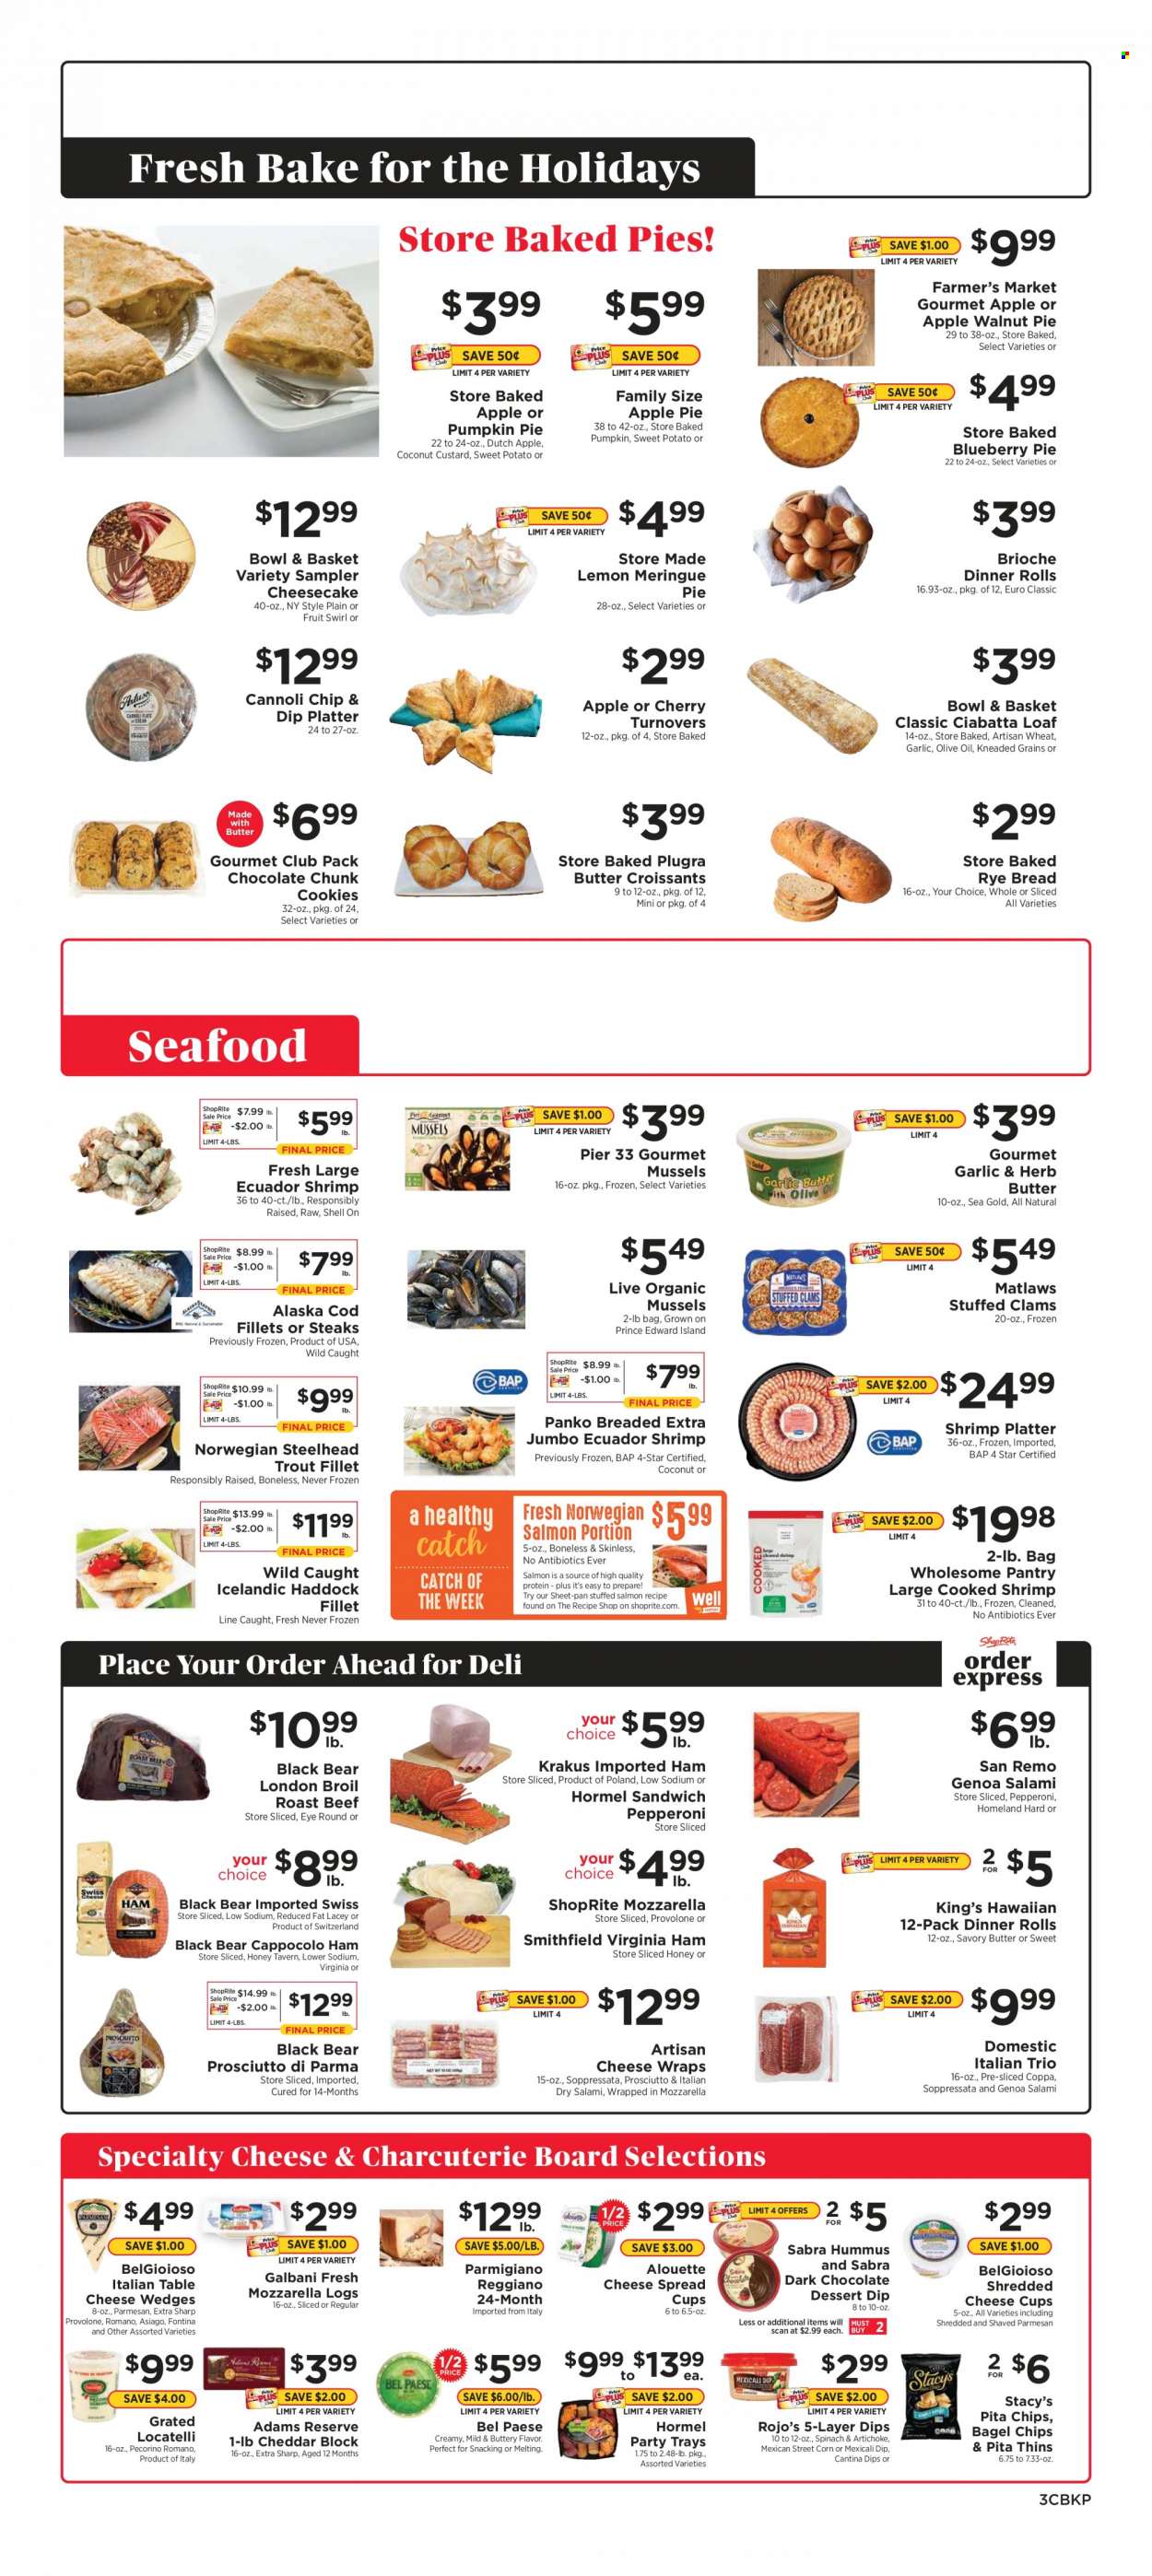 thumbnail - ShopRite Flyer - 11/21/2021 - 11/27/2021 - Sales products - bagels, bread, ciabatta, dinner rolls, croissant, brioche, Bowl & Basket, turnovers, wraps, apple pie, cheesecake, panko breadcrumbs, sweet potato, clams, cod, mussels, salmon, trout, haddock, seafood, shrimps, sandwich, Hormel, salami, soppressata, ham, prosciutto, virginia ham, pepperoni, hummus, cheese spread, asiago, Fontina, mozzarella, shredded cheese, cheese cup, parmesan, Pecorino, Parmigiano Reggiano, Galbani, Provolone, cookies, chocolate, dark chocolate, Thins, pita chips, olive oil, beef meat, steak, roast beef, pan, cup. Page 3.